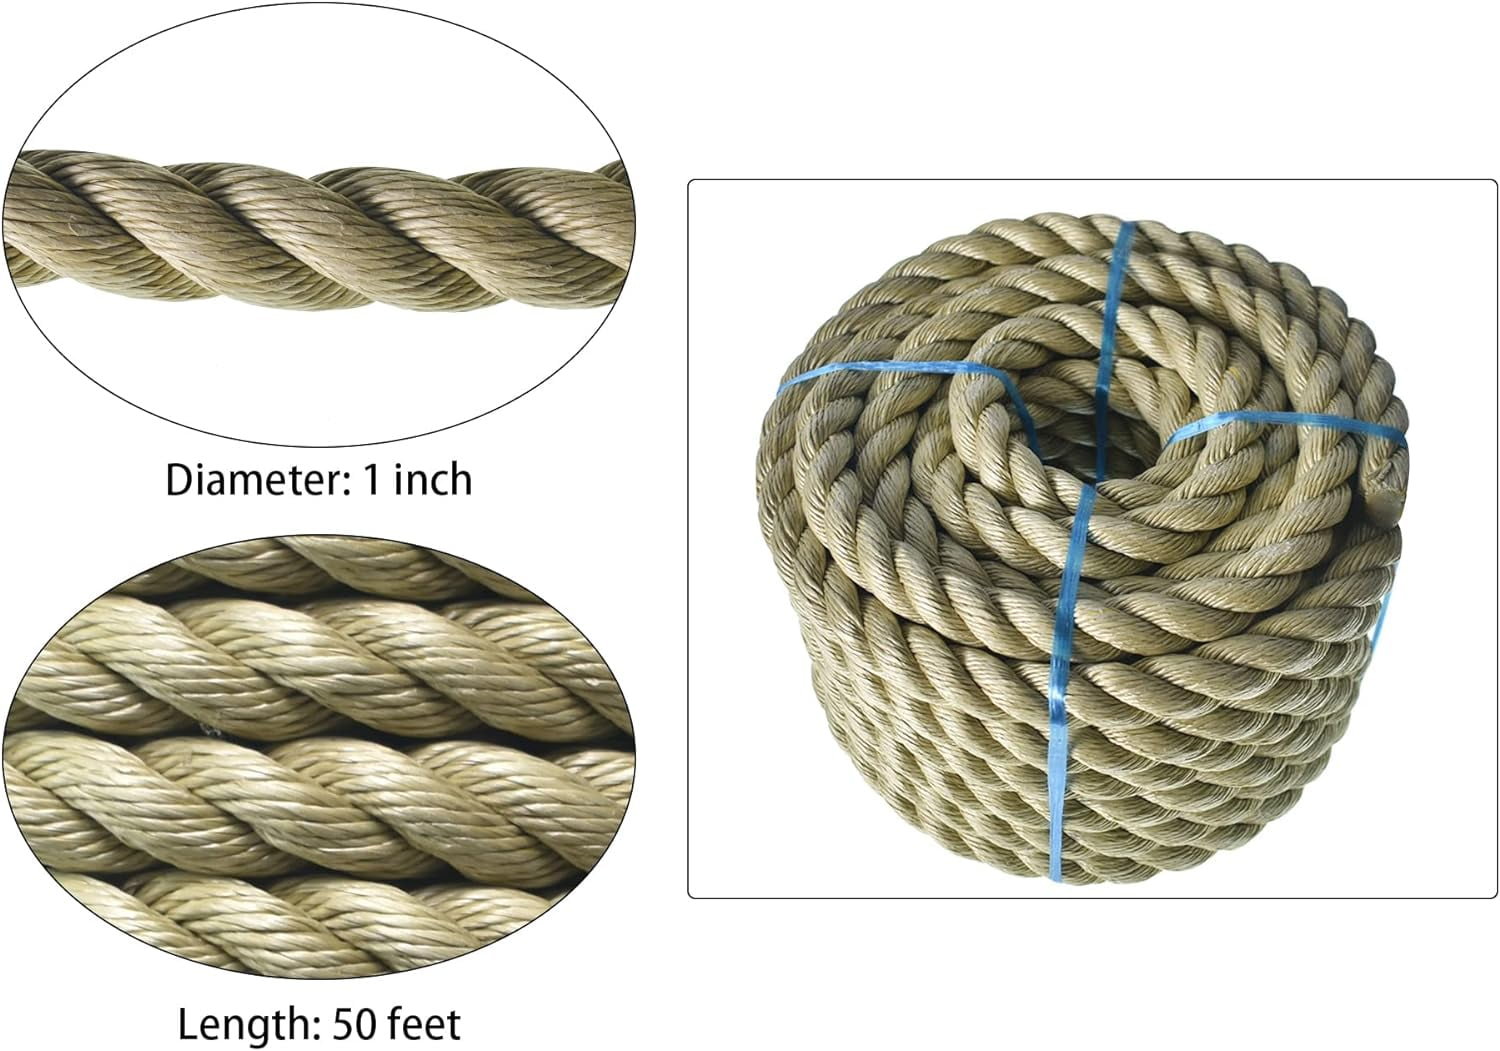 Golberg 3 Strand Natural Fiber Tan Manila Rope Available in Many Sizes &  Lengths